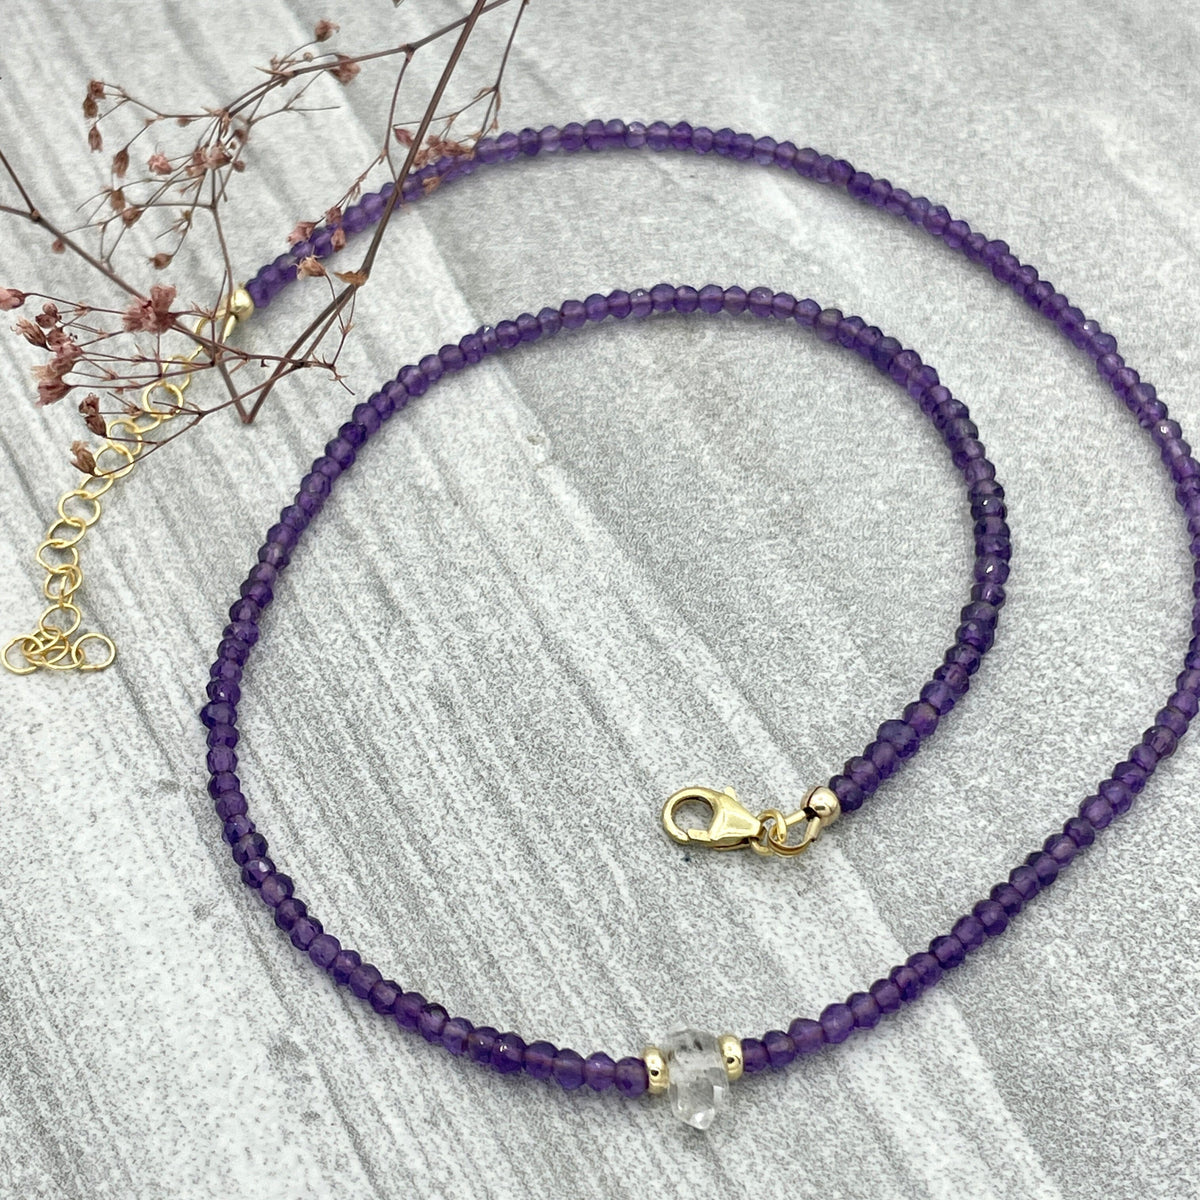 Strung Together Amethyst and Herkimer Diamond Beaded Necklace - 14k gold filled | Little Rock Collection necklace Amanda K Lockrow